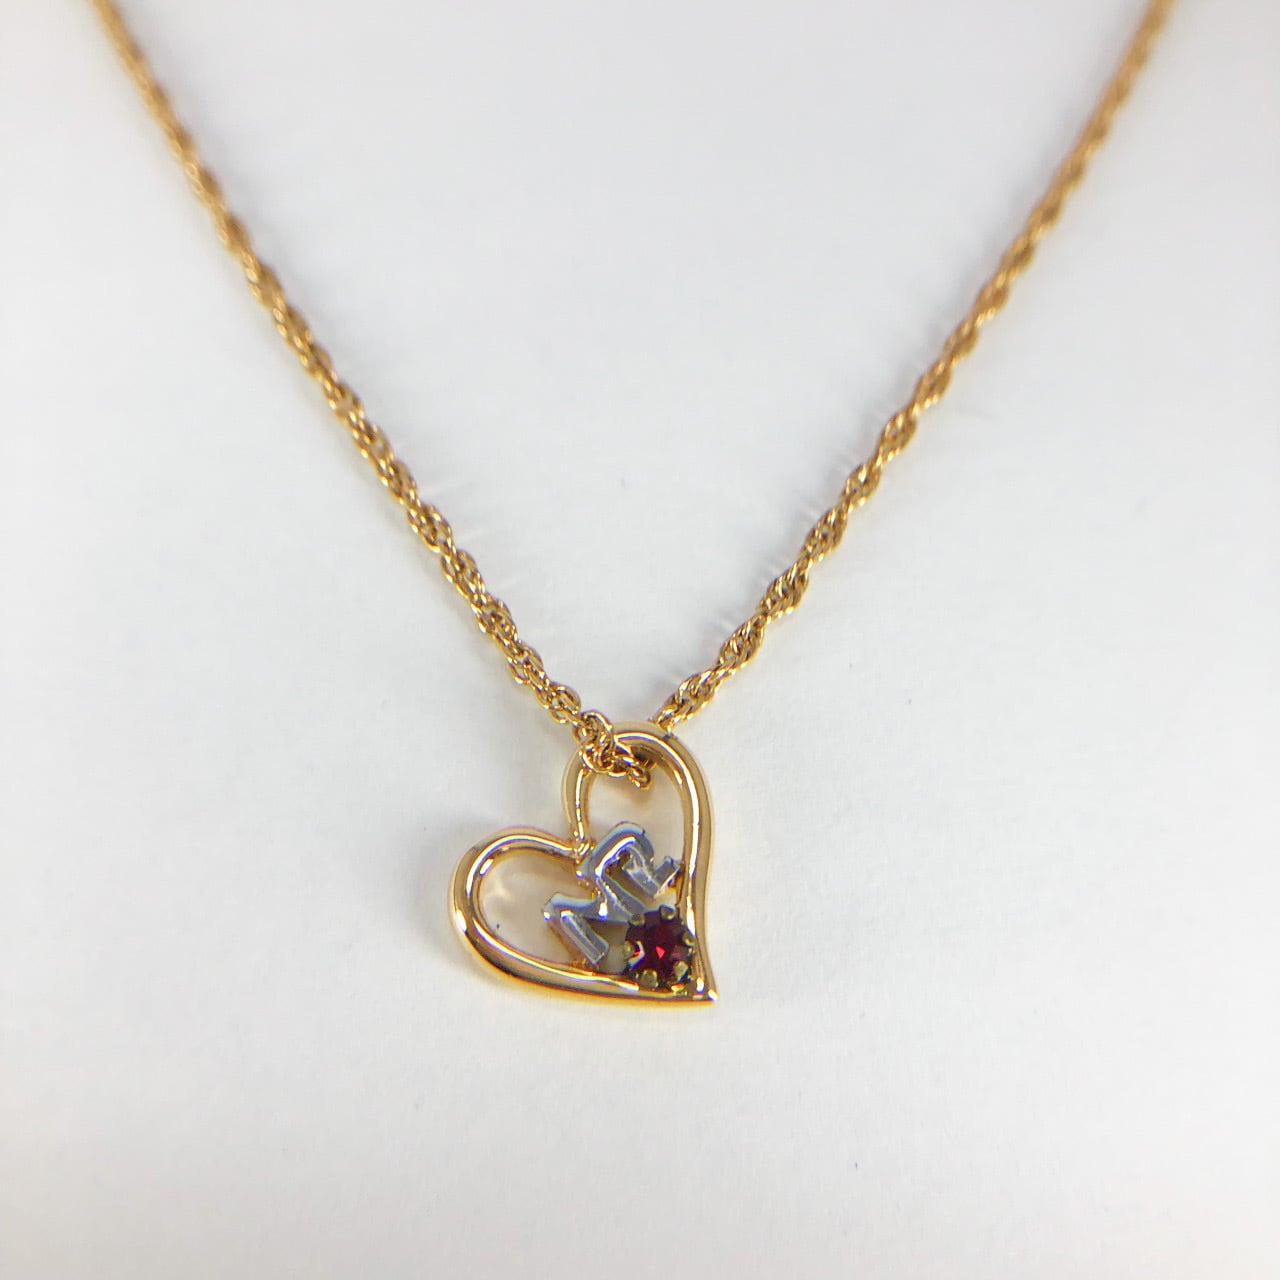 NINA RICCI” heart necklace[n-66] ヴィンテージネックレス | LEO 